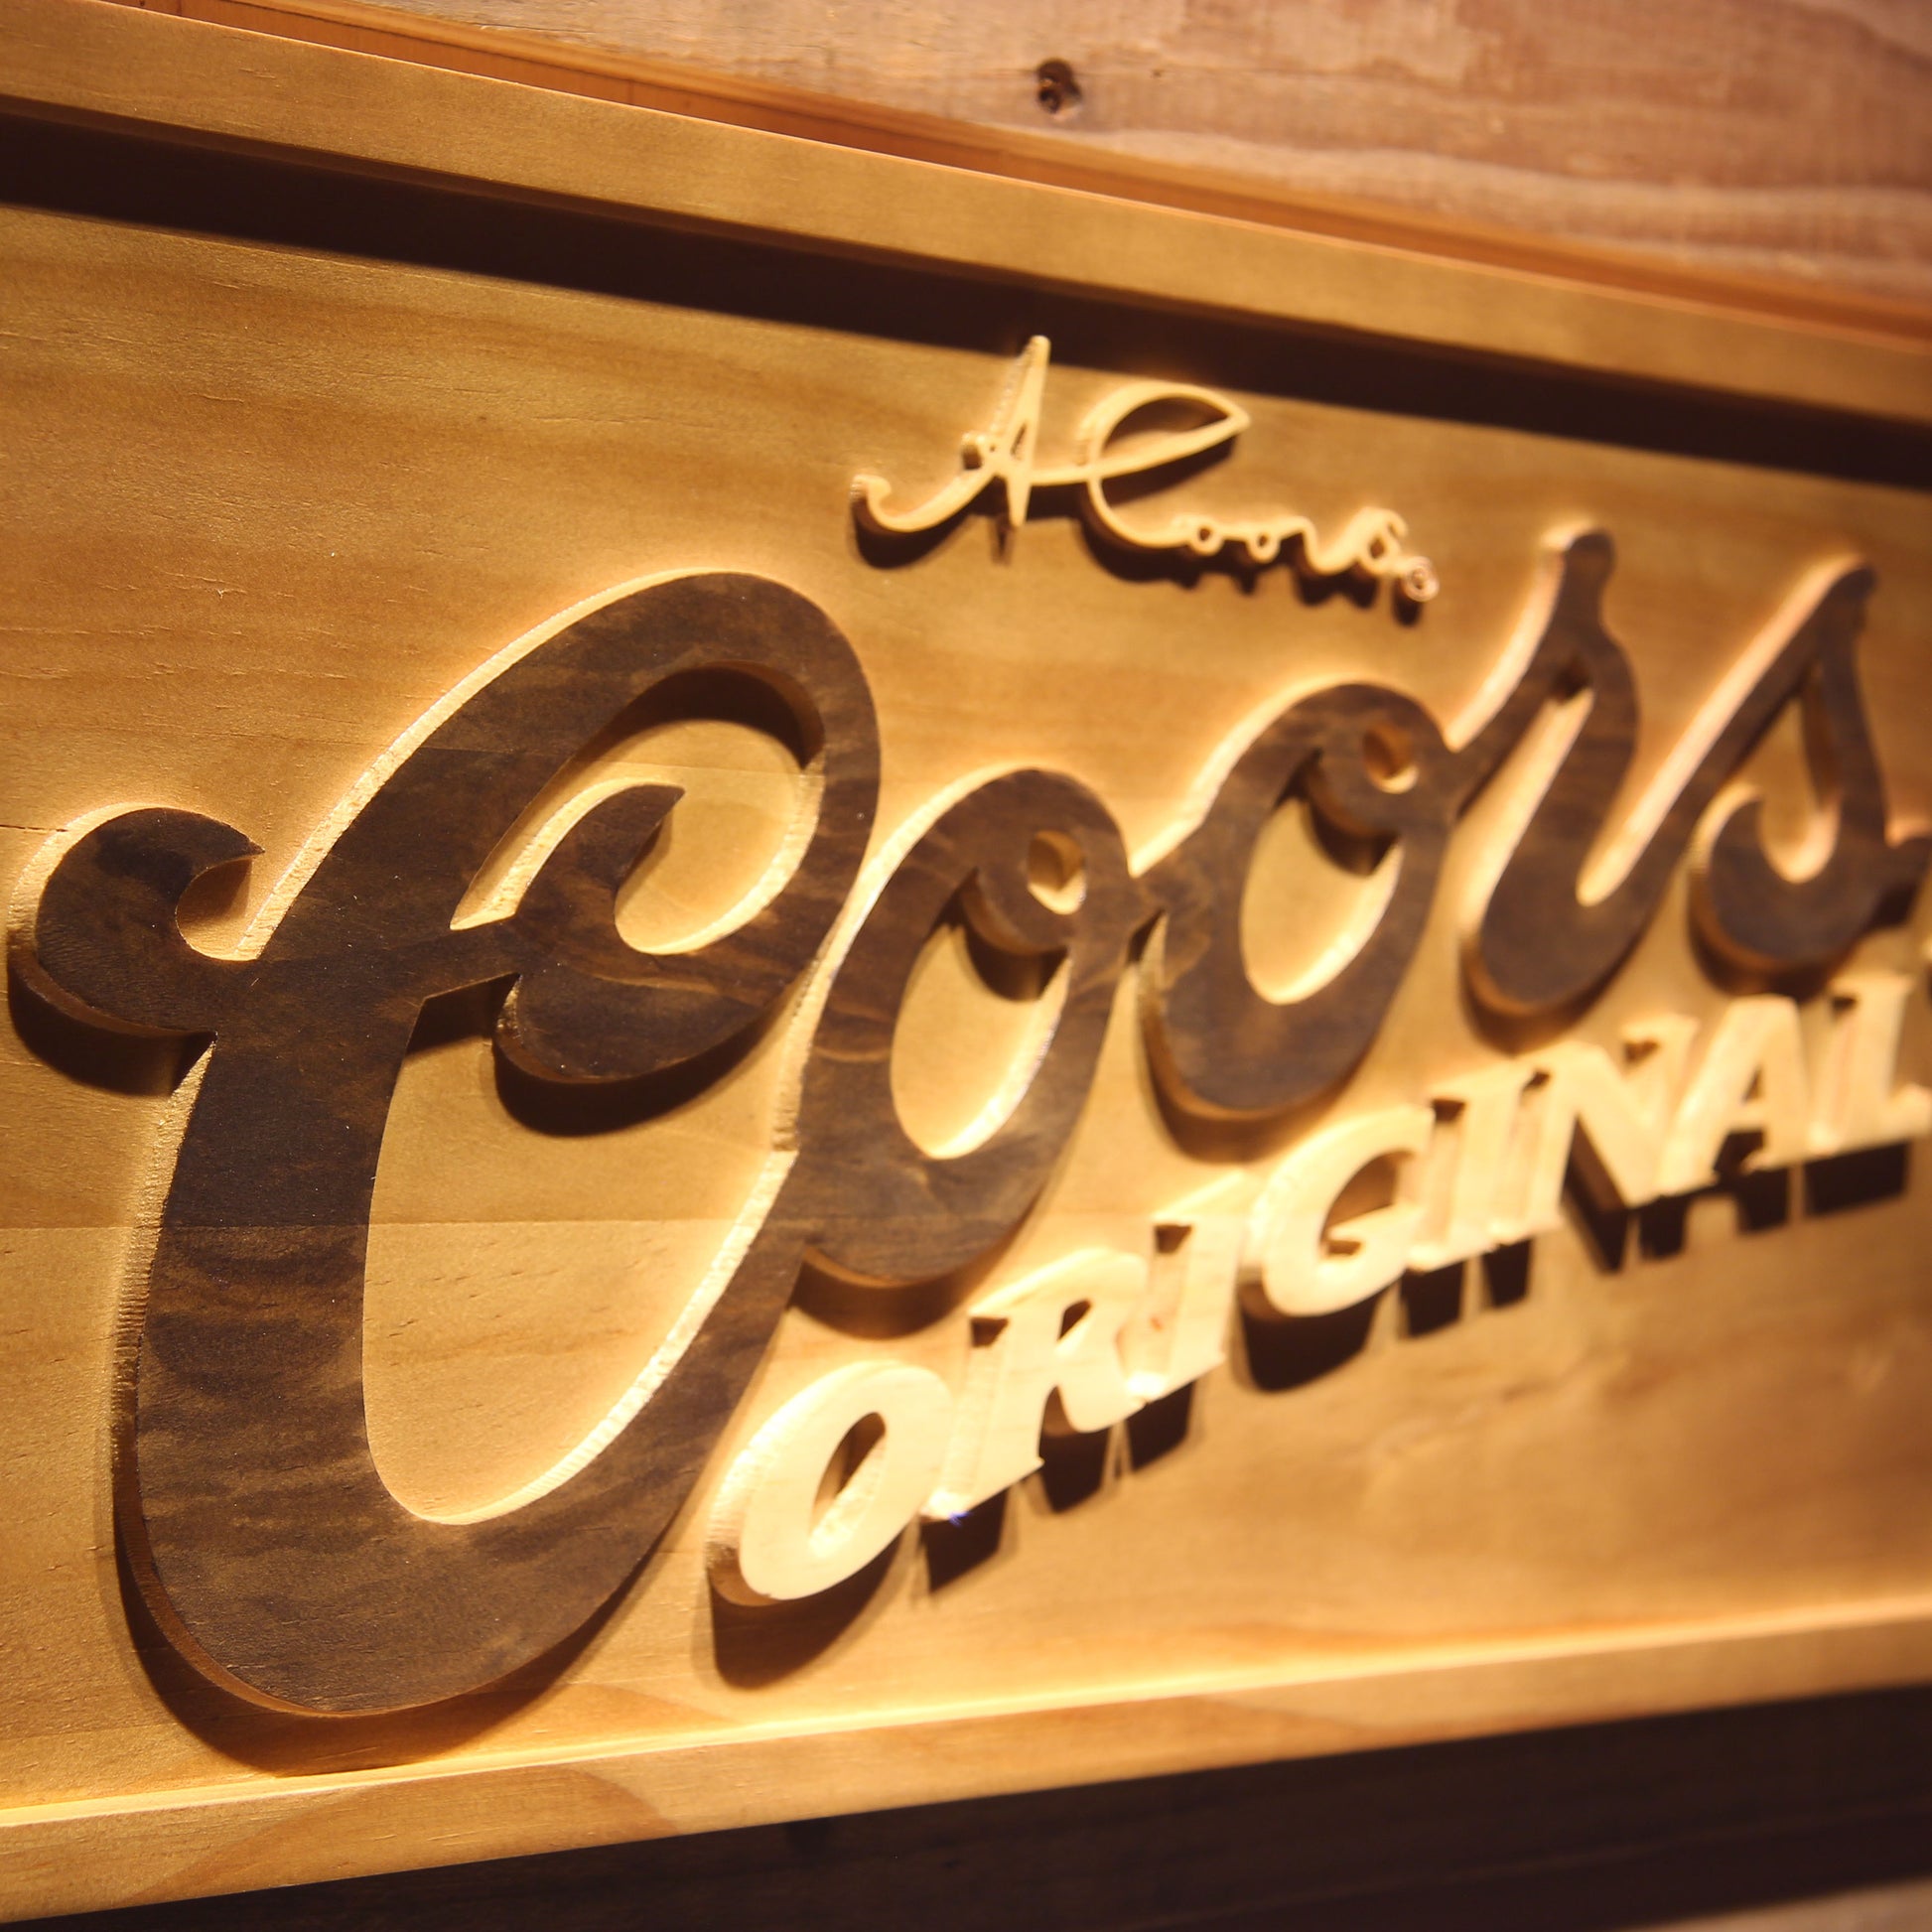 Coors Original  3D Wooden Bar Signs by Woody Signs Co. - Handmade Crafted Unique Wooden Creative